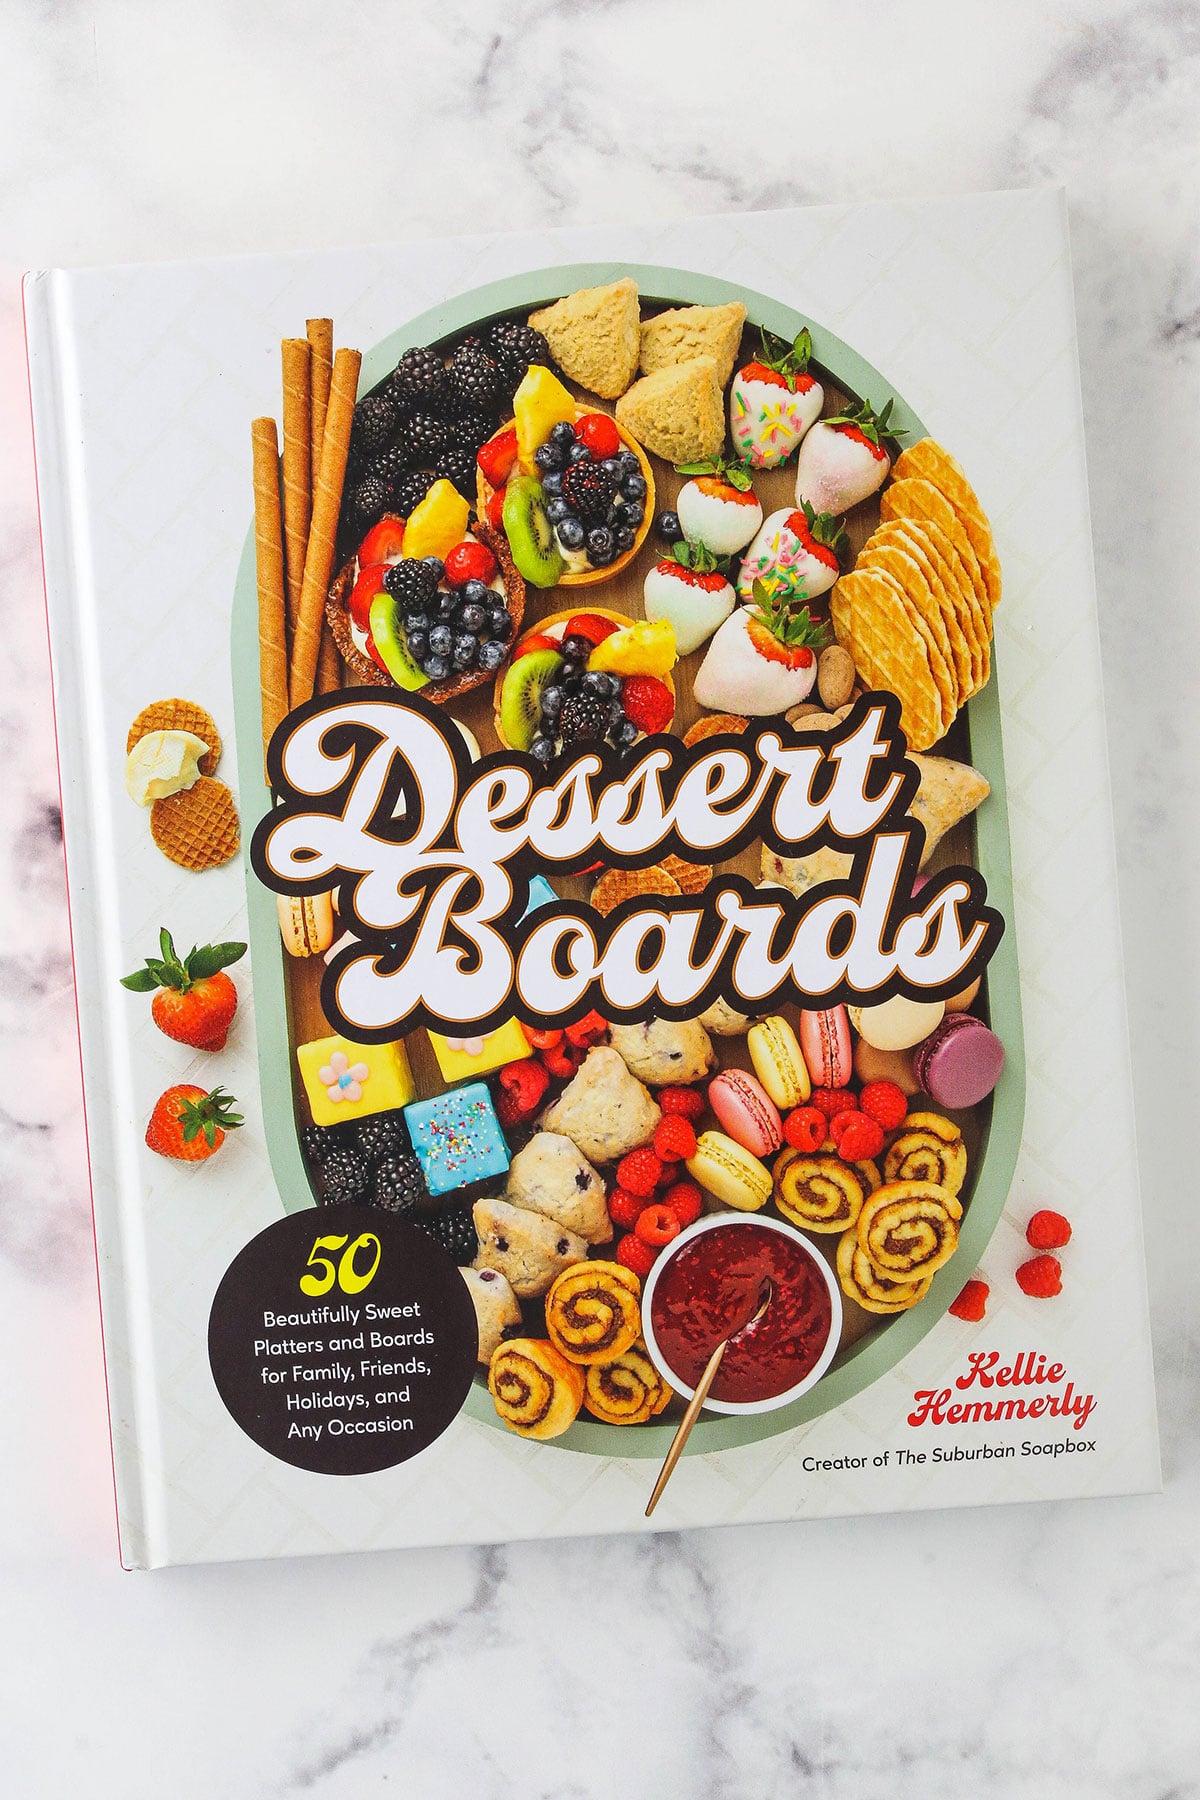 the cover of the book "Dessert Boards"